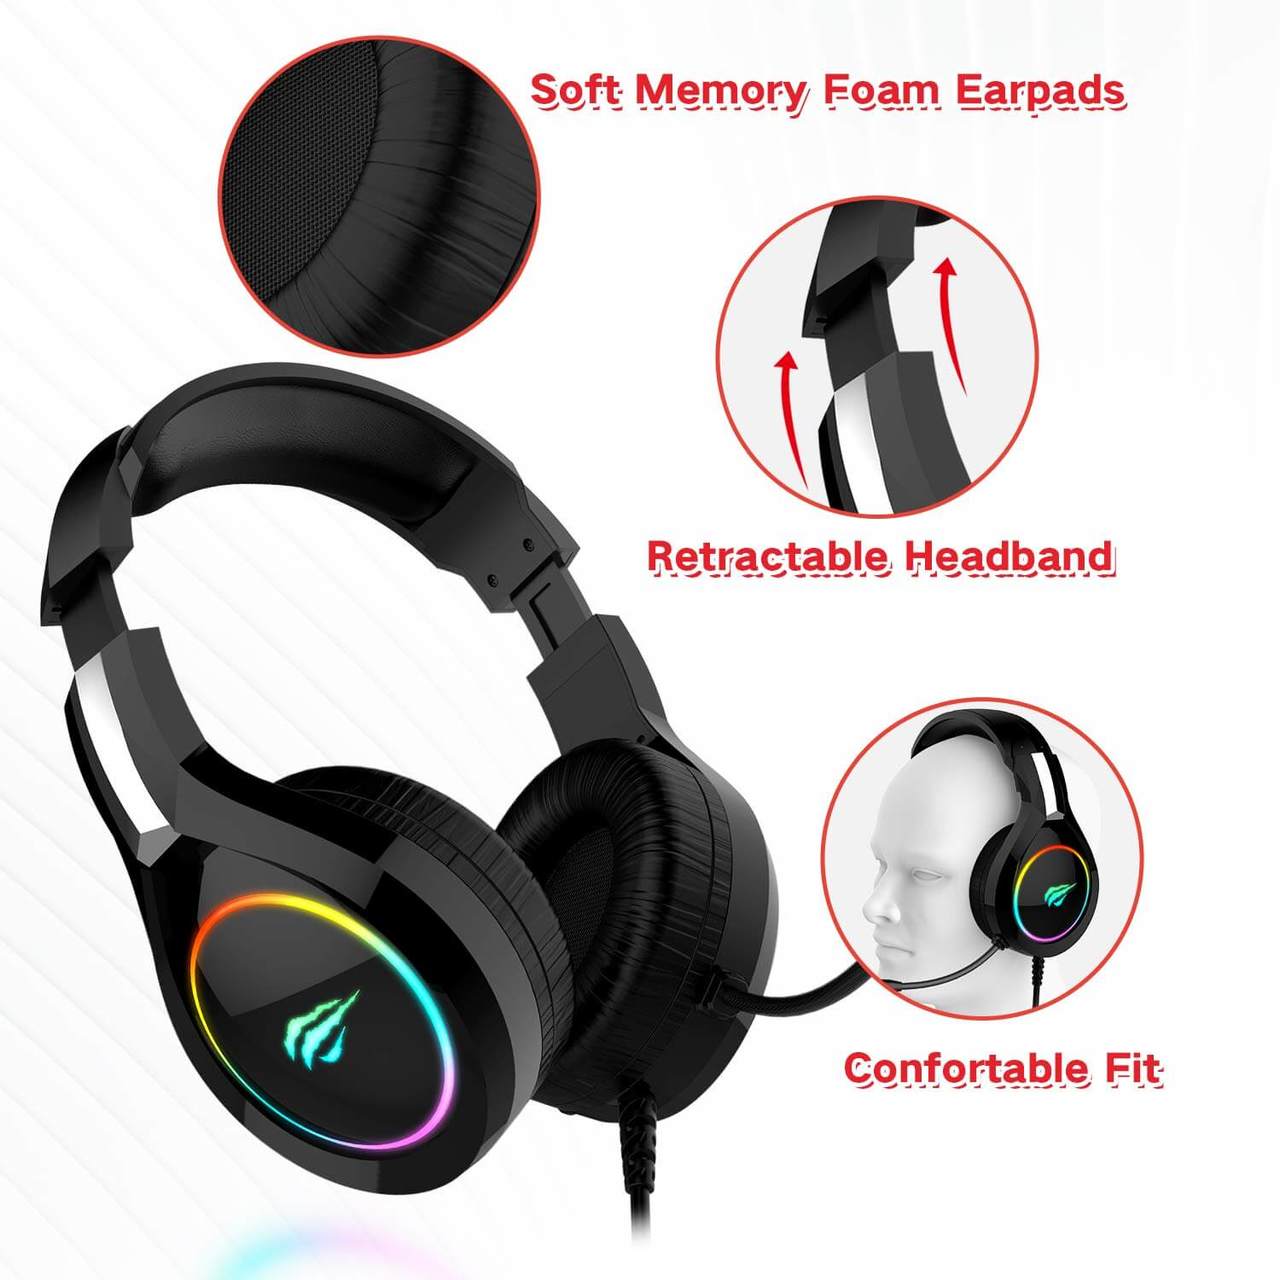 GAMENOTE E-SPORTS RGB GAMING Headset for PC / PS4 / Xbox One / Mobile - X GAMING Technology